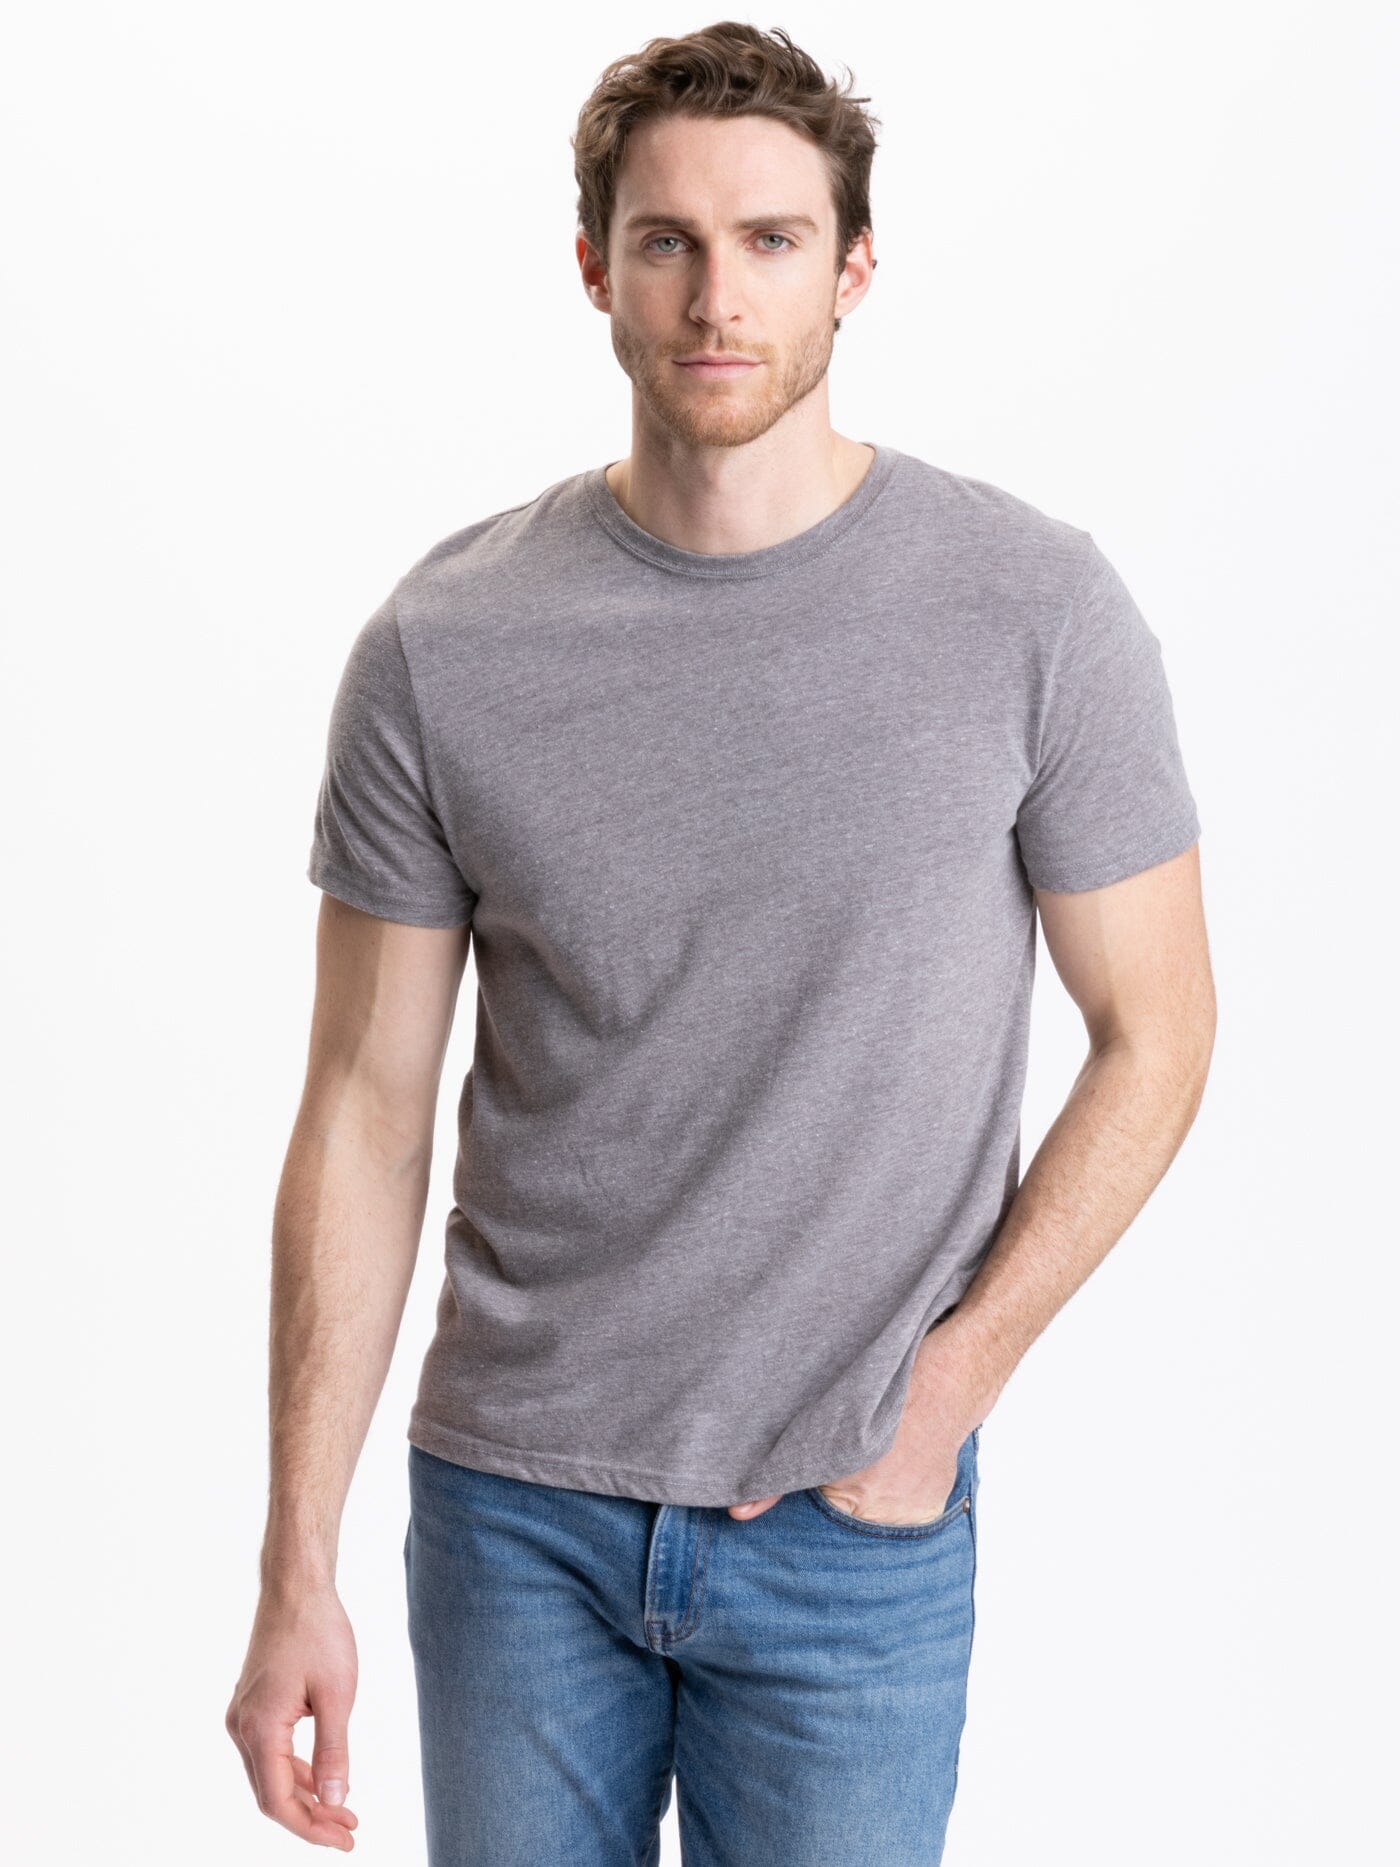 Triblend Crew Neck Tee in – Heather Grey Threads 4 Thought